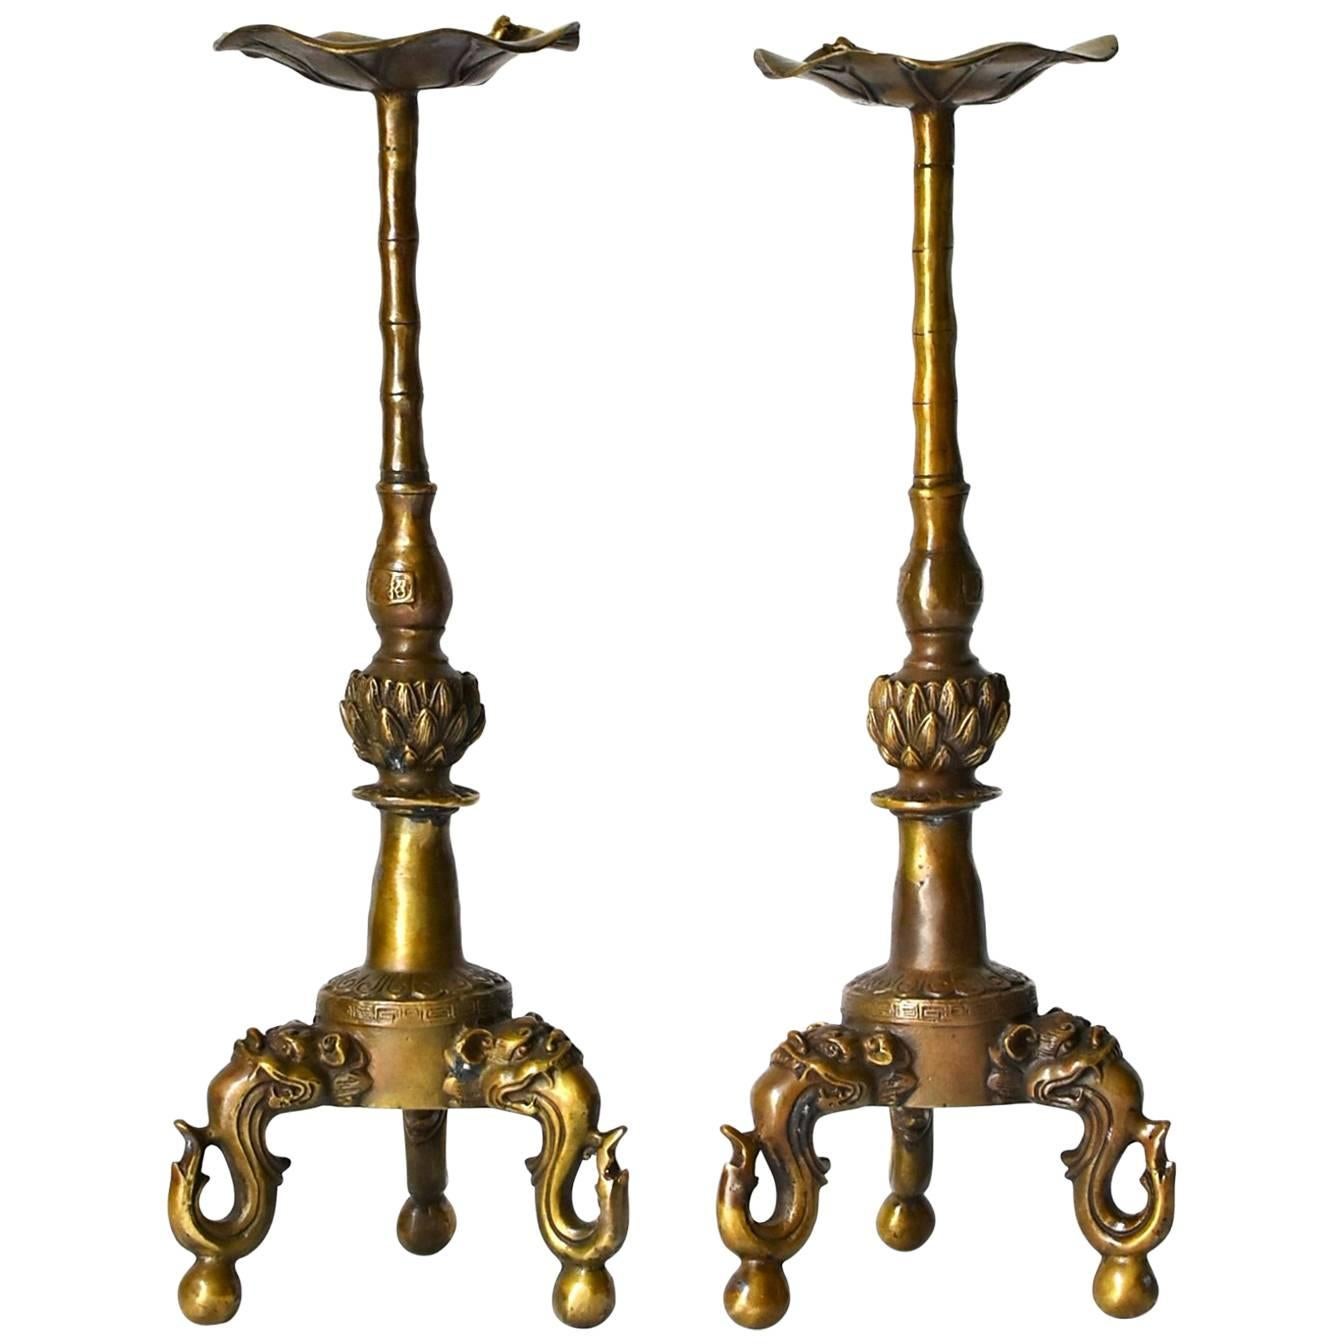 Pair of Brass Candle Holders with Lotus Leaf and Frog